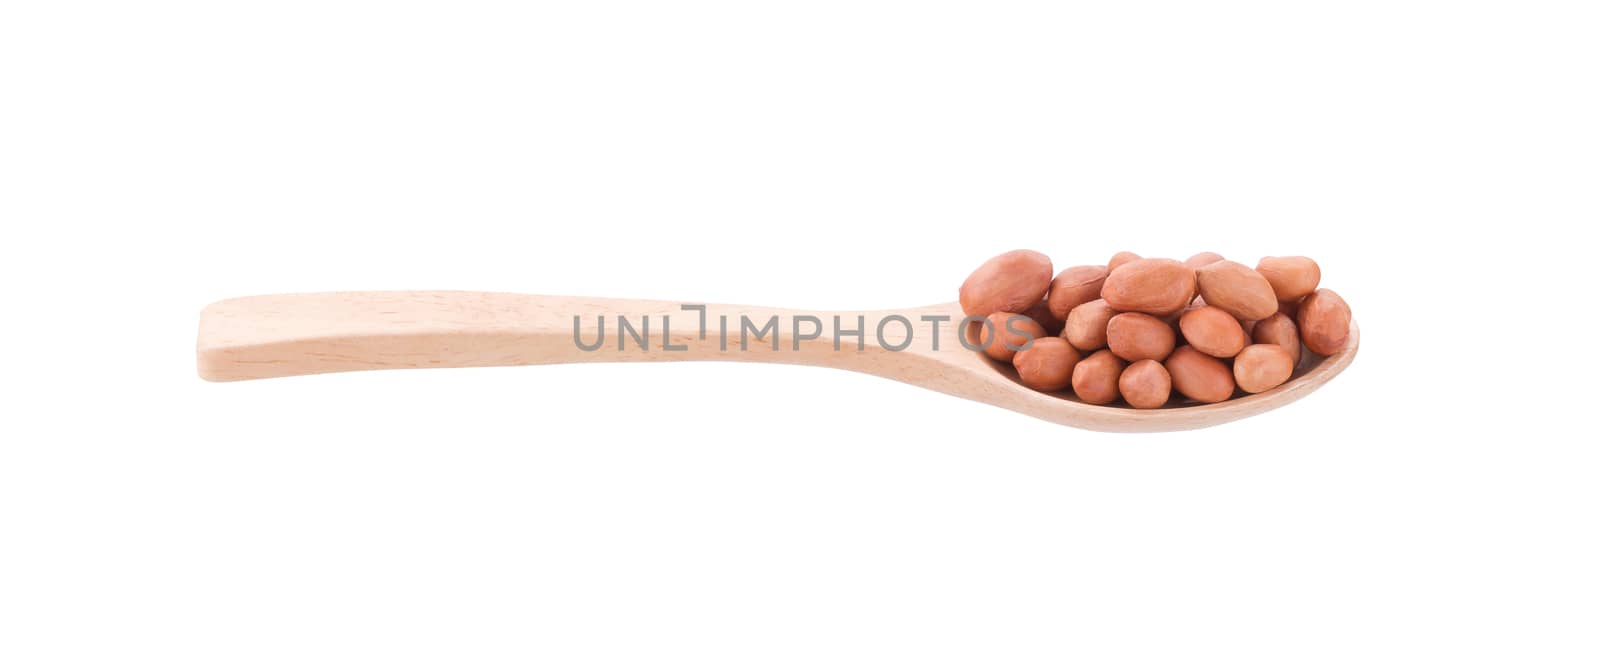 Peanuts in wooden spoon isolated on white background by kaiskynet